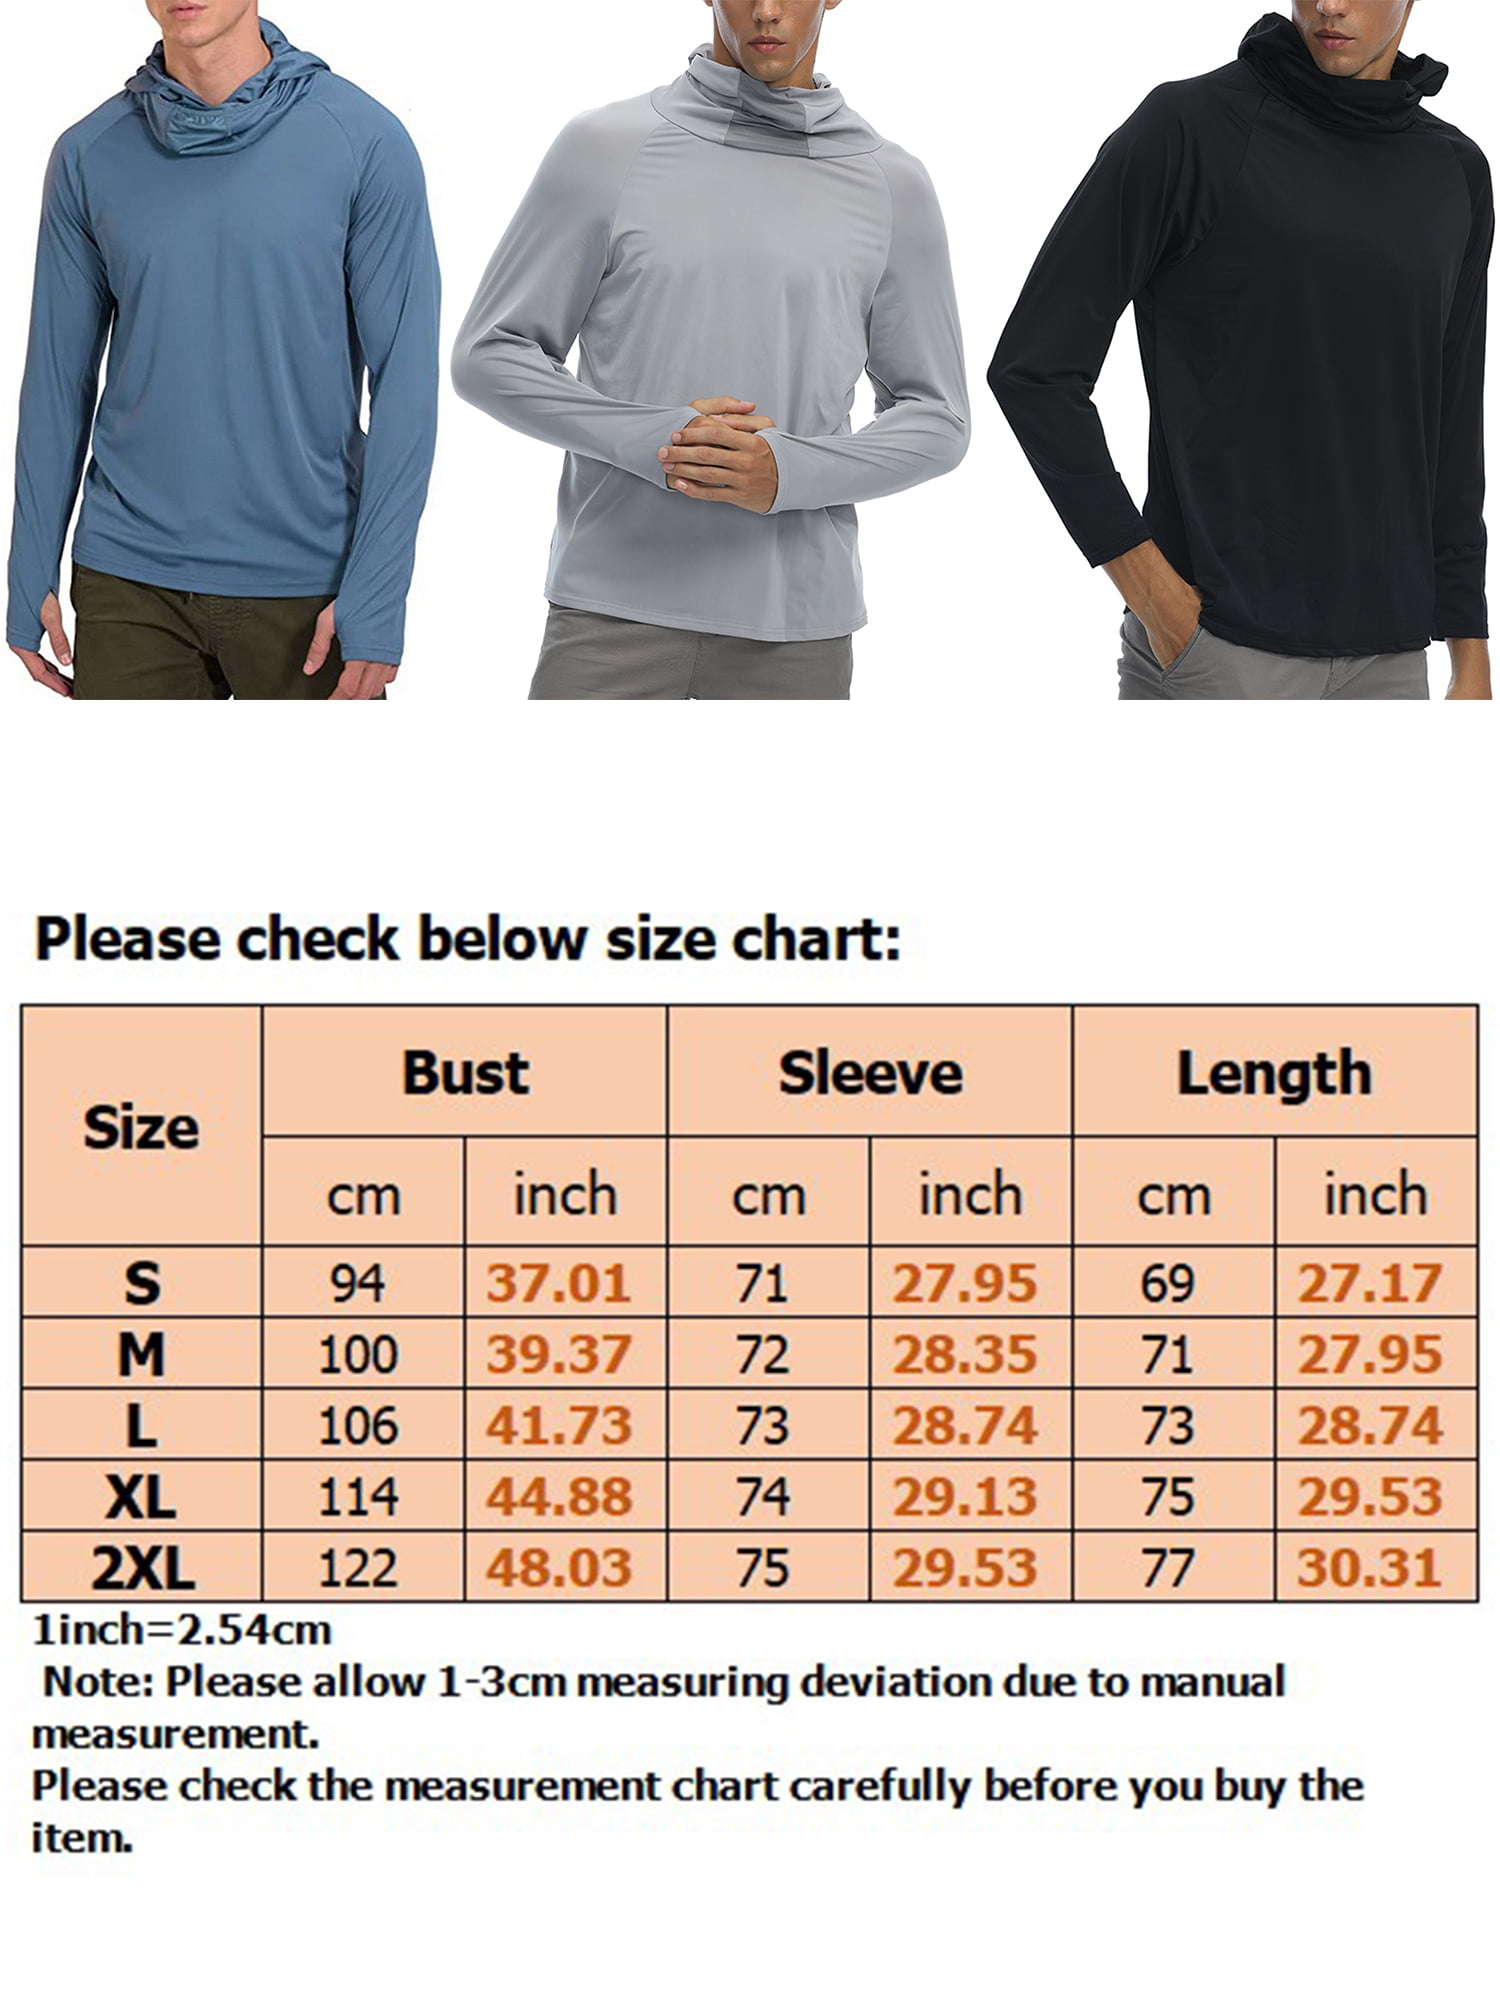 Niuer Breathable Fishing Shirts for Men UPF 50 with Gaiter Mask Sun Protection T-Shirt Summer Quick Dry Long Sleeve Fishing Hoodies Tops, Women's